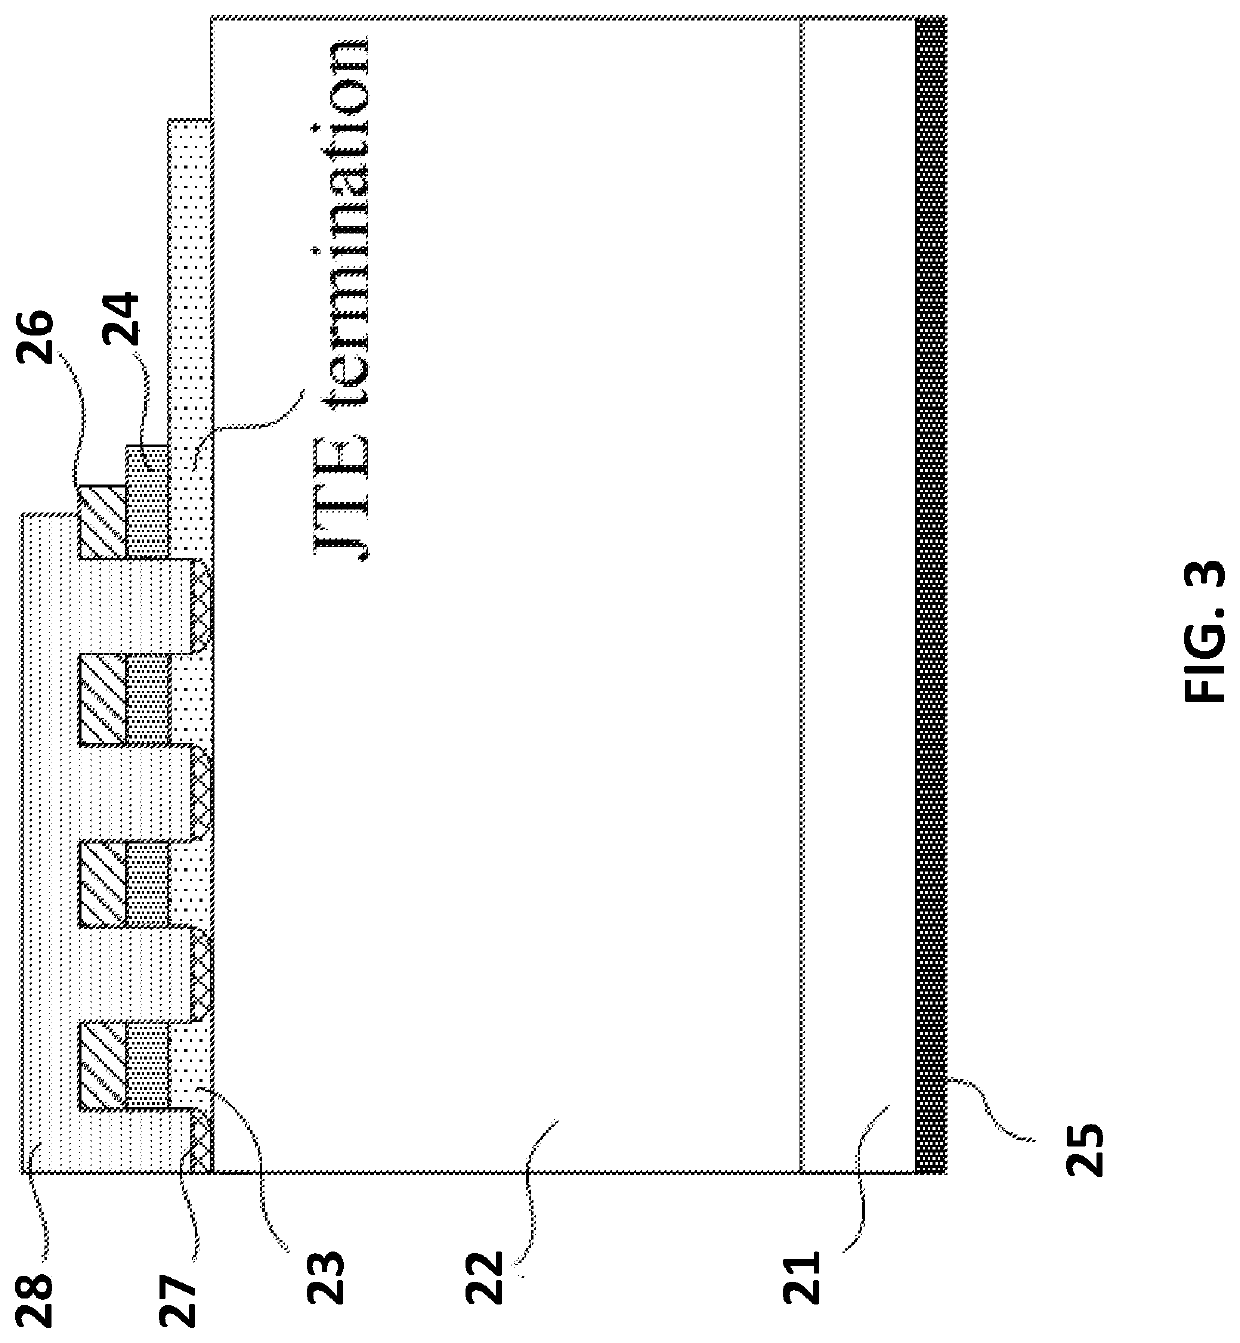 Schottky diode with high breakdown voltage and surge current capability using double p-type epitaxial layers